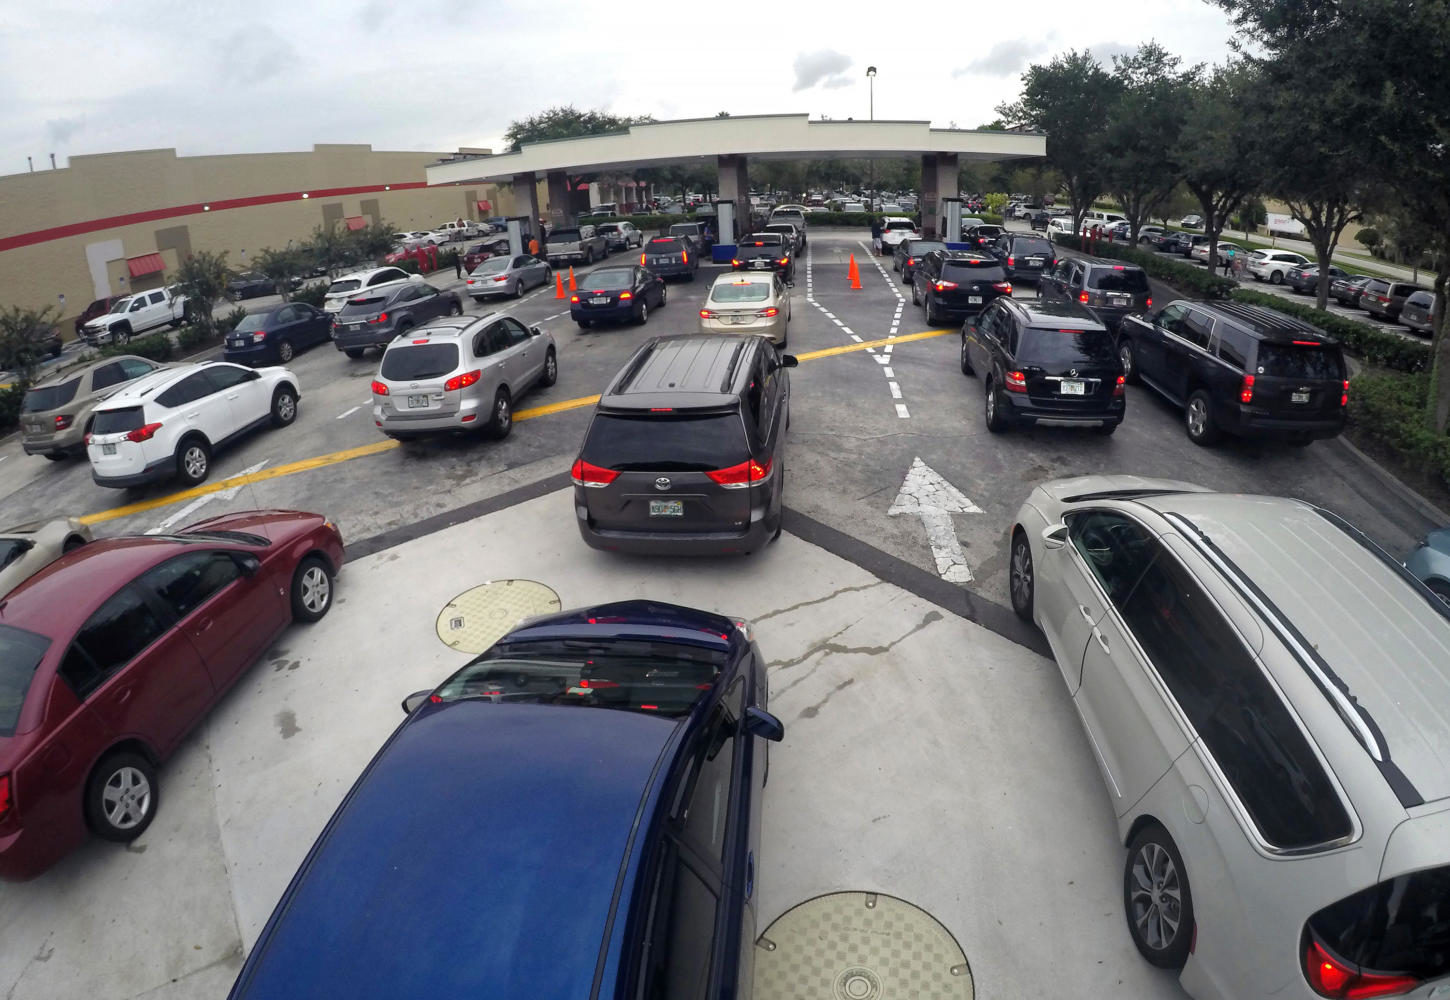 Drivers wait in line for gasoline at the Costco in Altamonte Springs, Fla., ahead of the anticipated arrival of Hurricane Irma on Wednesday, Sept. 6, 2017. (Joe Burbank/Orlando Sentinel/TNS)